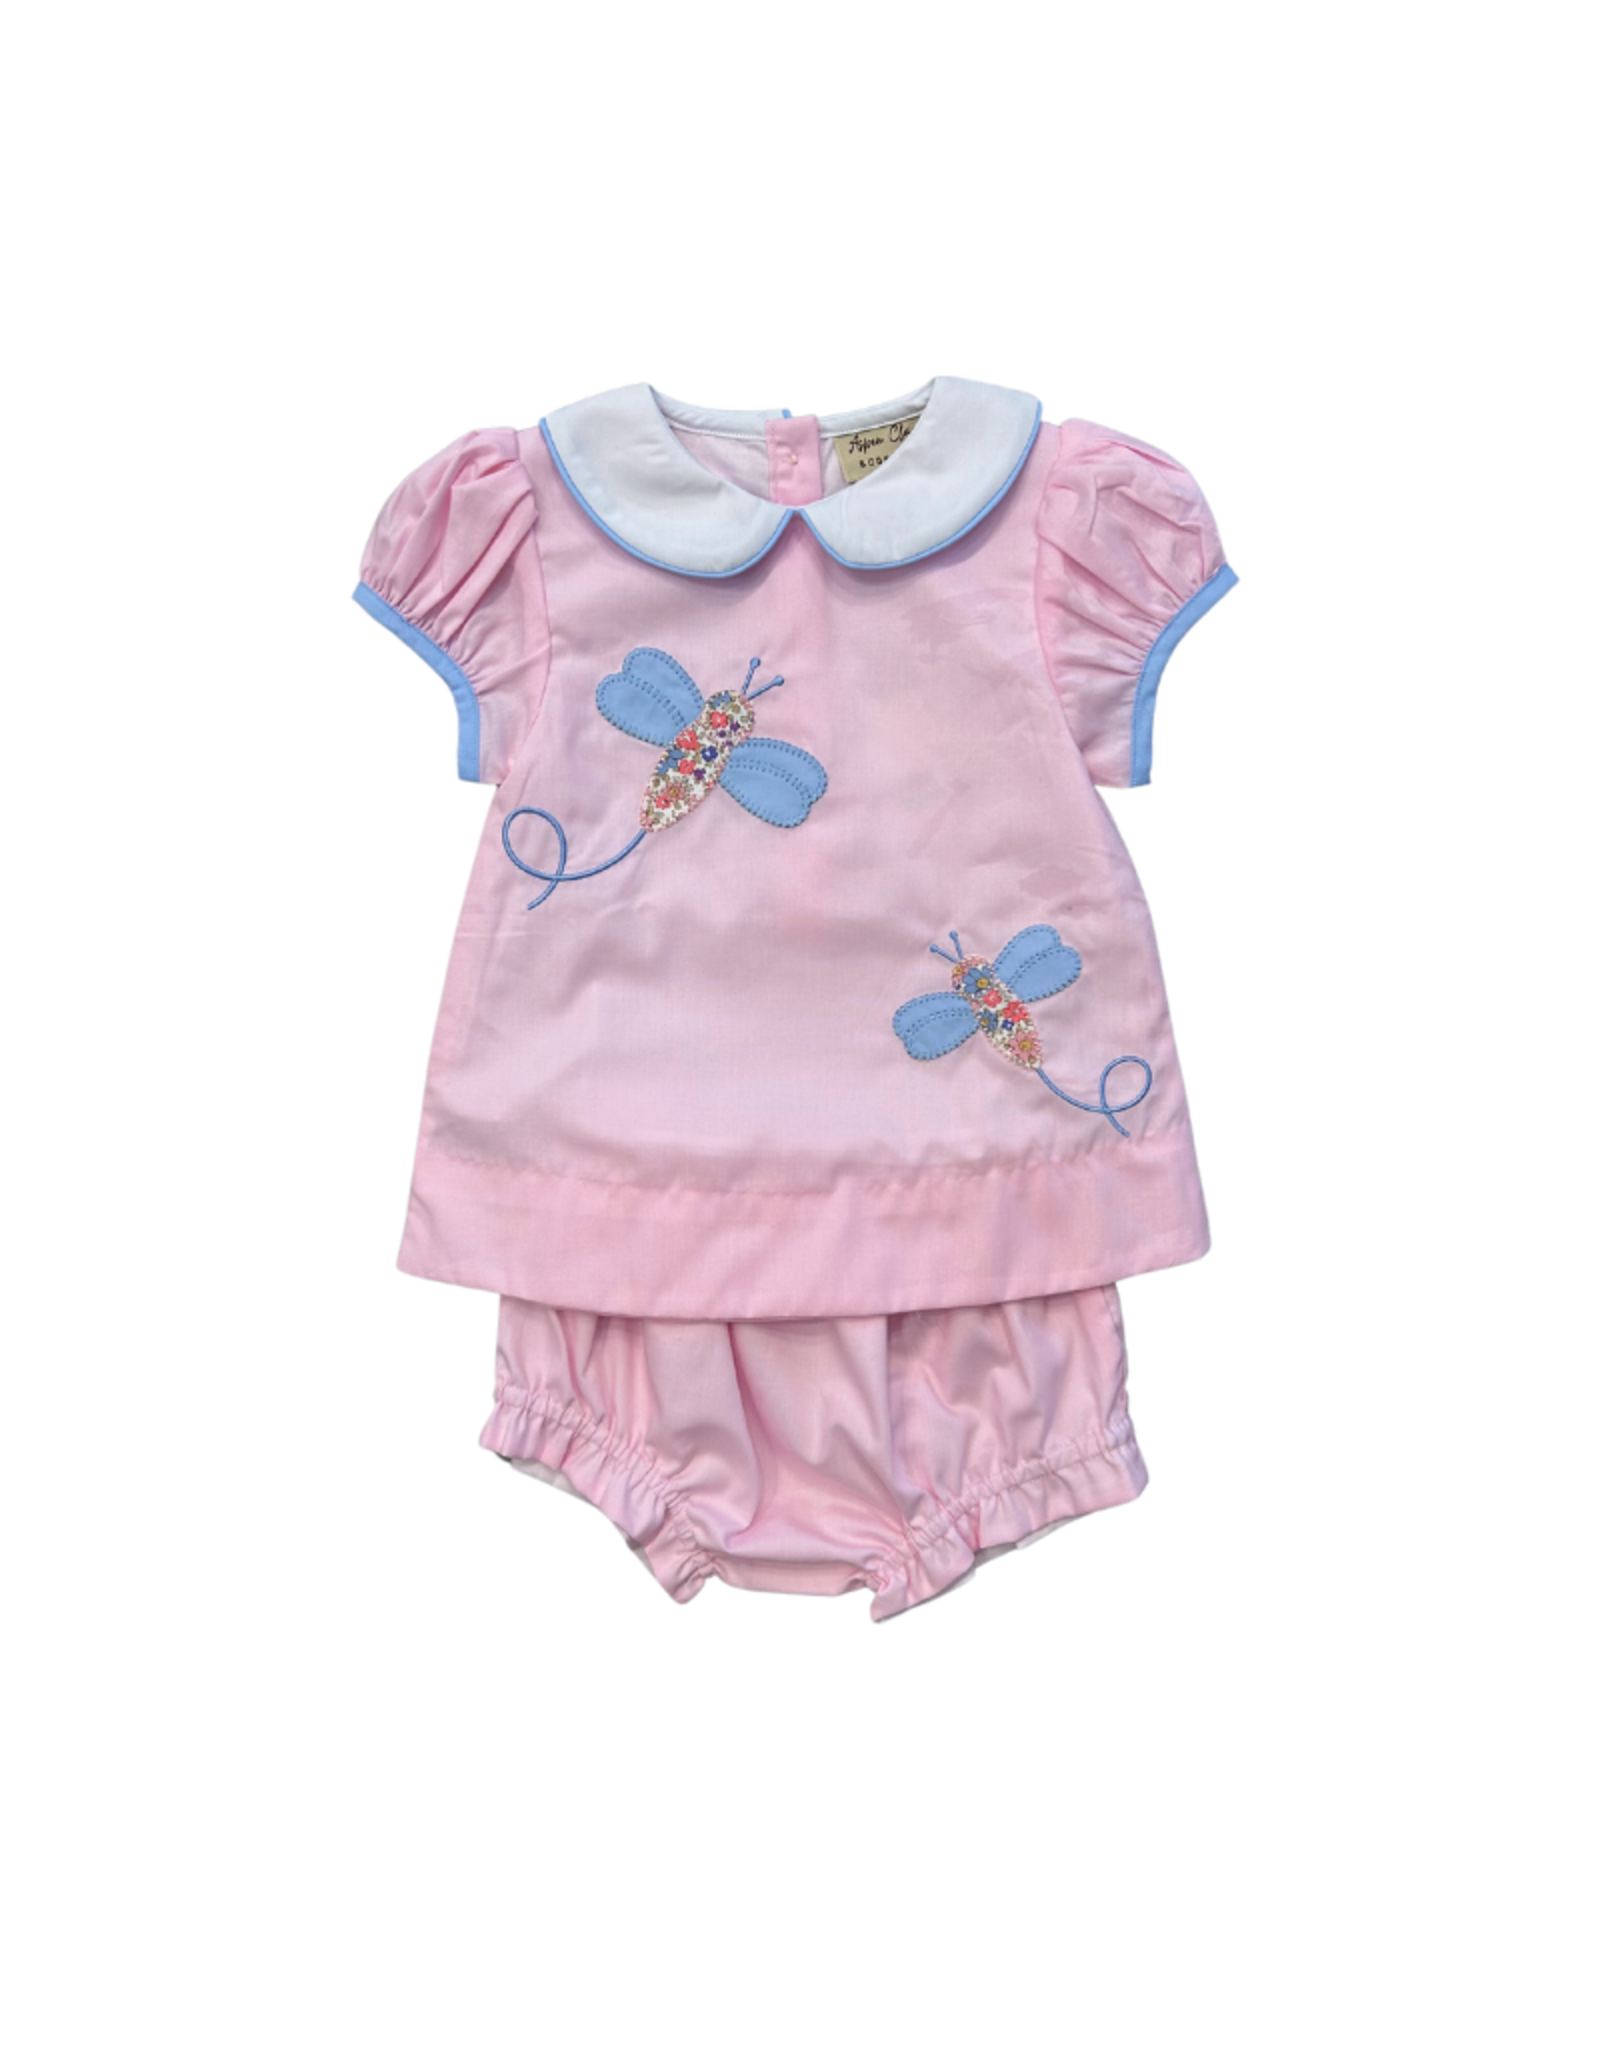 Aspen Claire & Company Pink Dragonfly Set